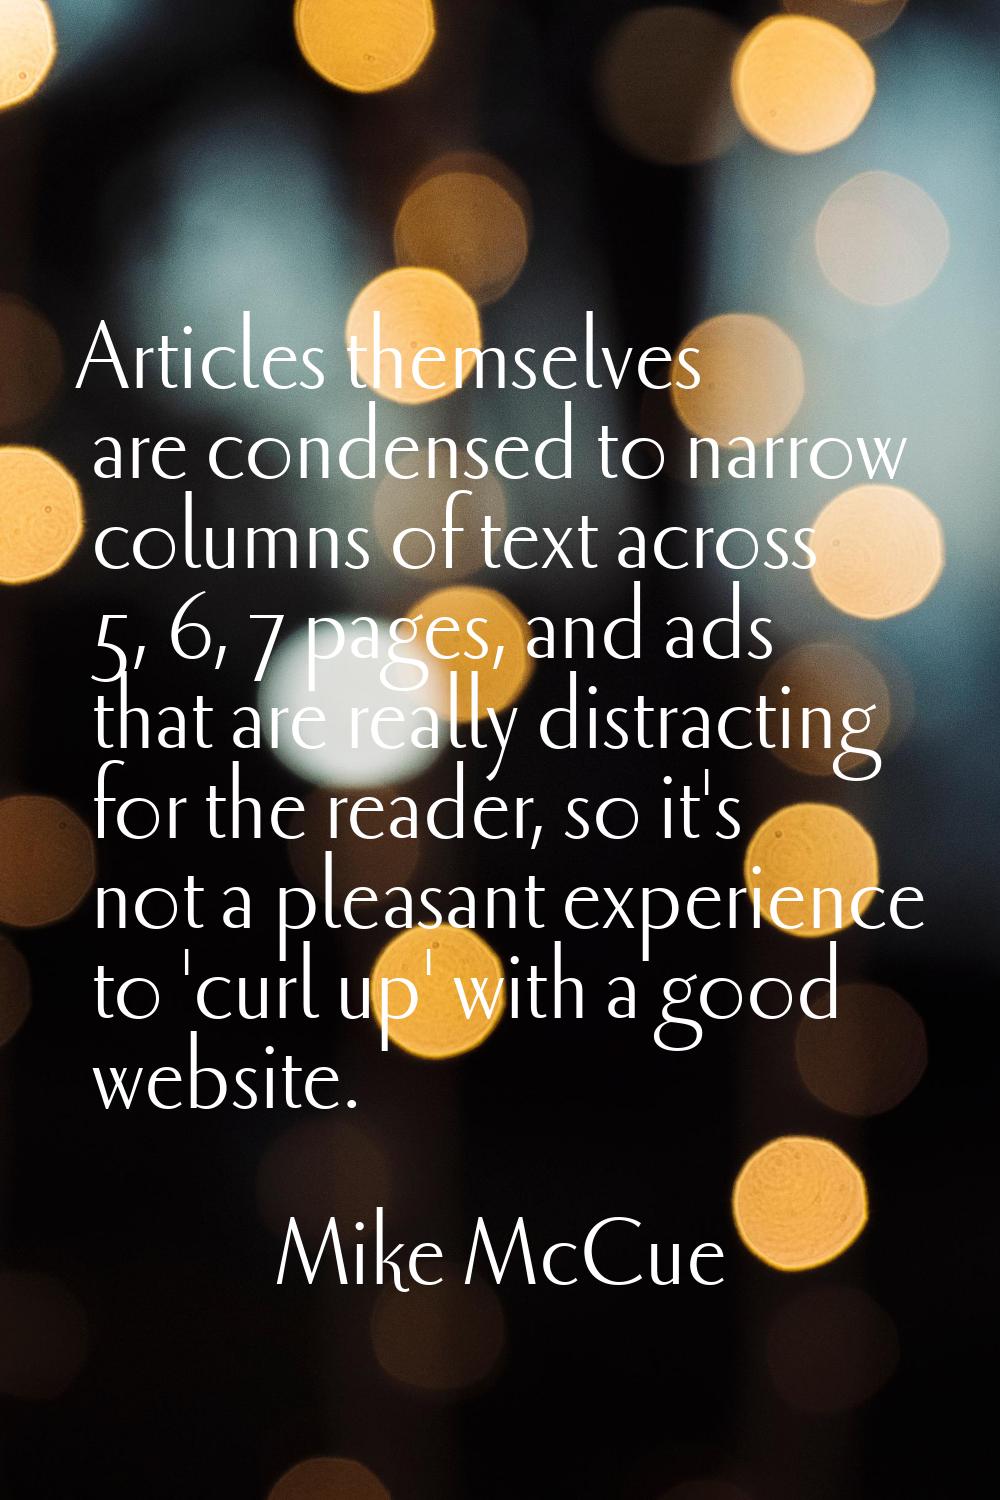 Articles themselves are condensed to narrow columns of text across 5, 6, 7 pages, and ads that are 